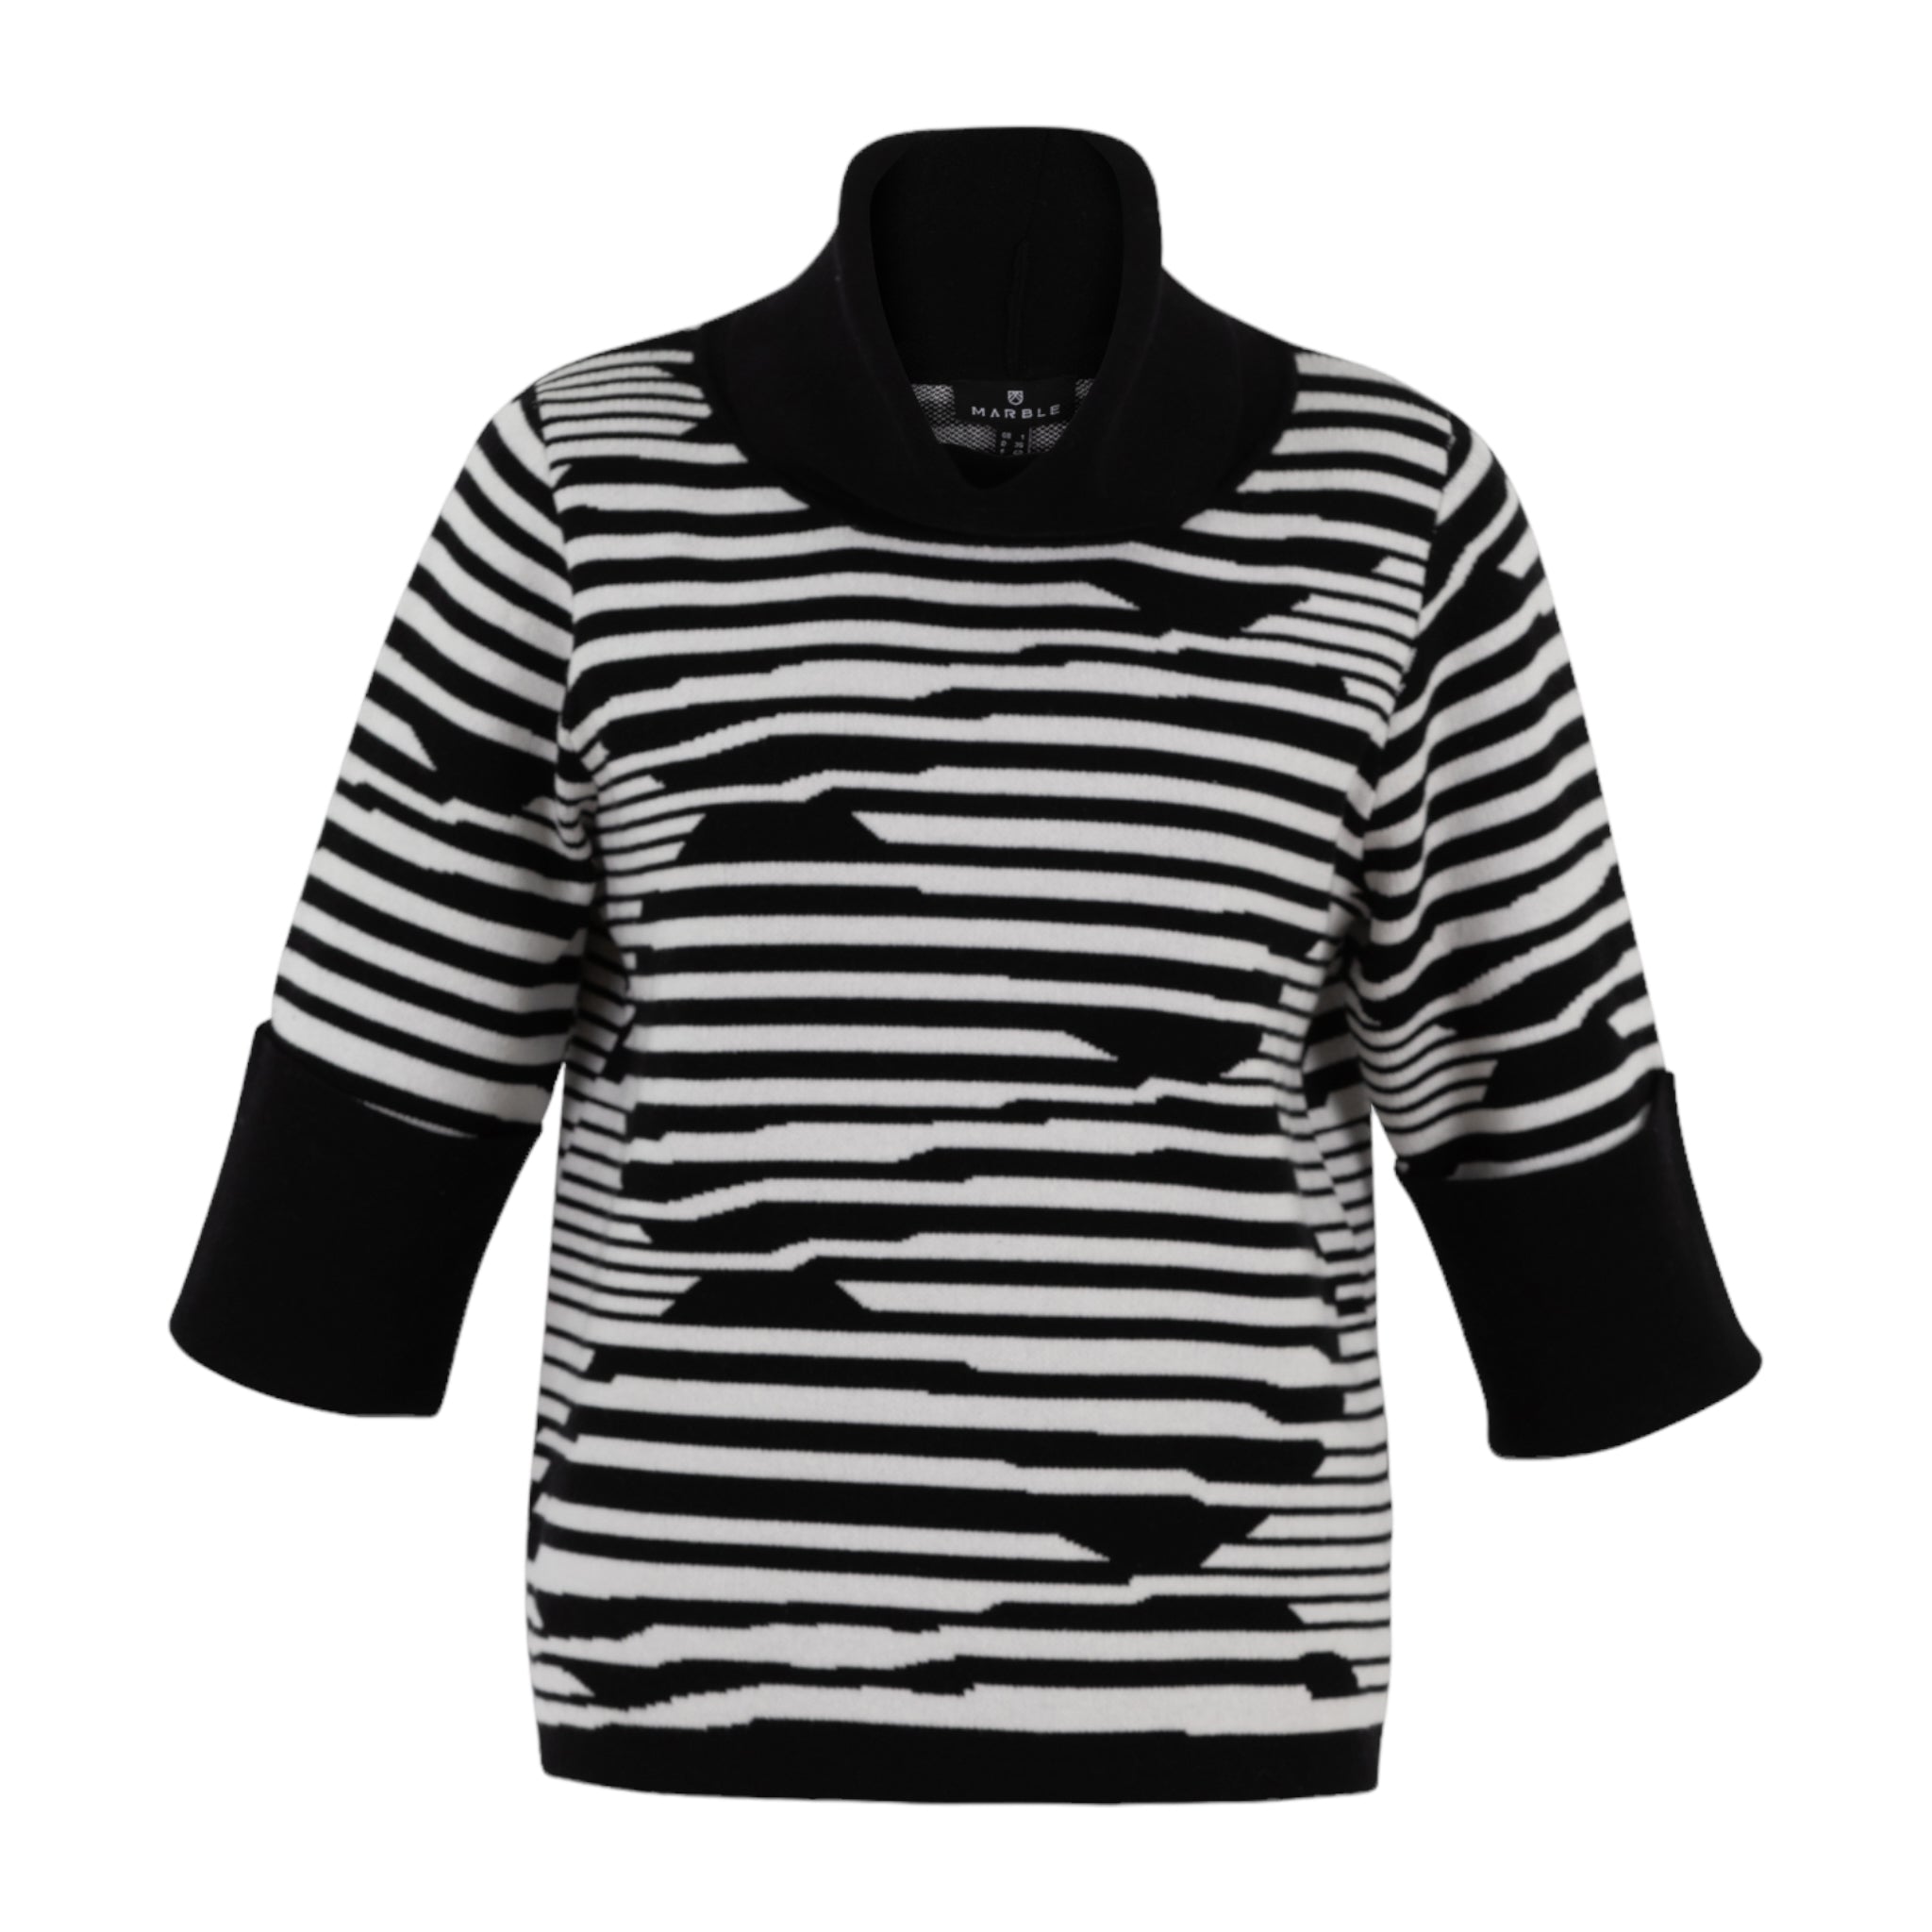 Marble-Three-Quarter-Sleeve-Sweater-Black-Product-Image-Front-View